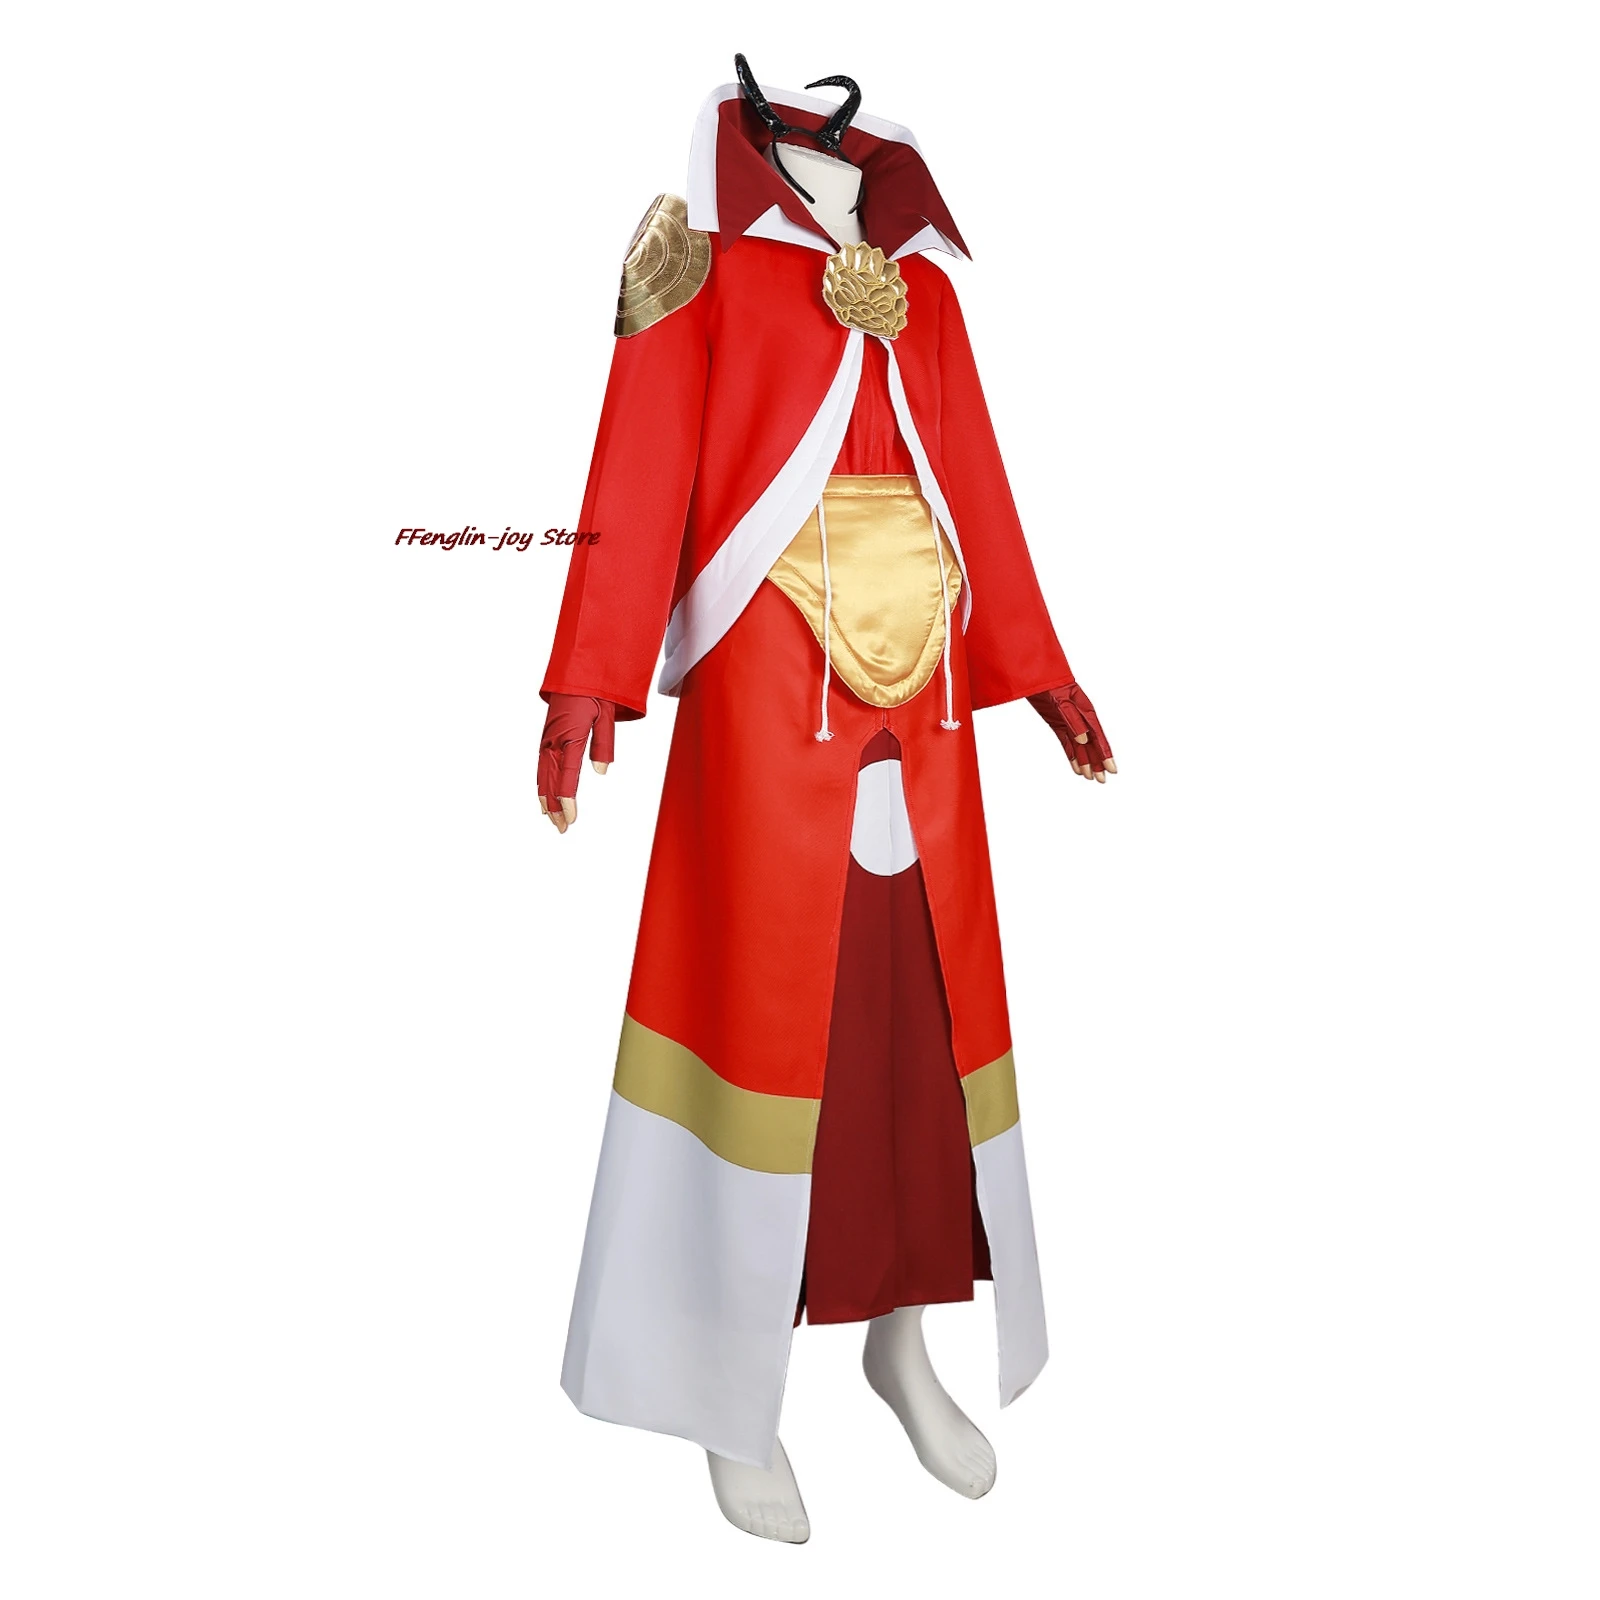 

Benimaru Cosplay Anime That Time I Got Reincarnated as a Slime Costume Red Uniform Cloak Role Play Clothing Halloween Party